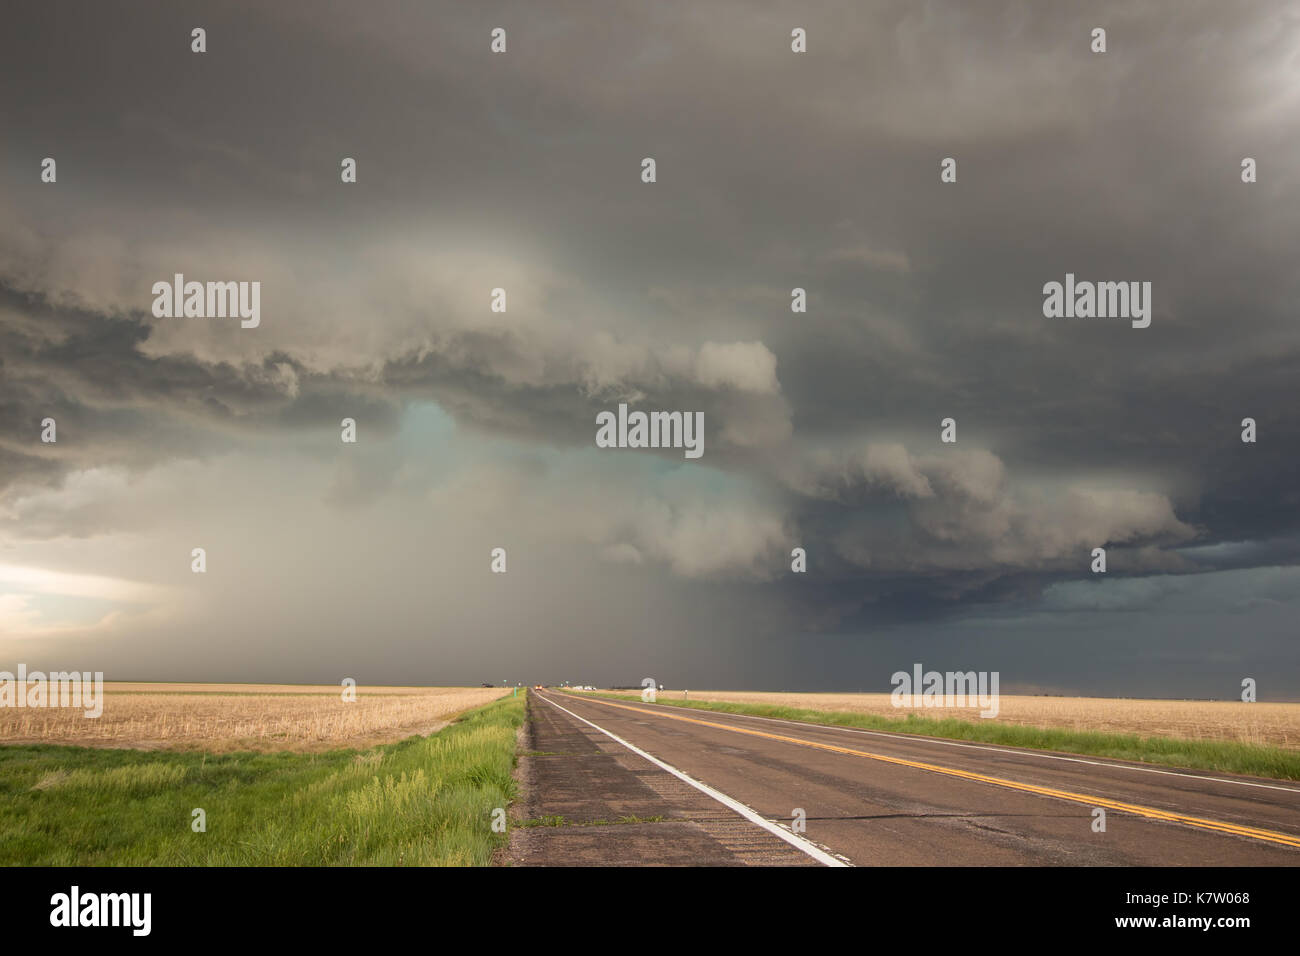 A powerful supercell thunderstorm looms over the highway in eastern Colorado. Stock Photo